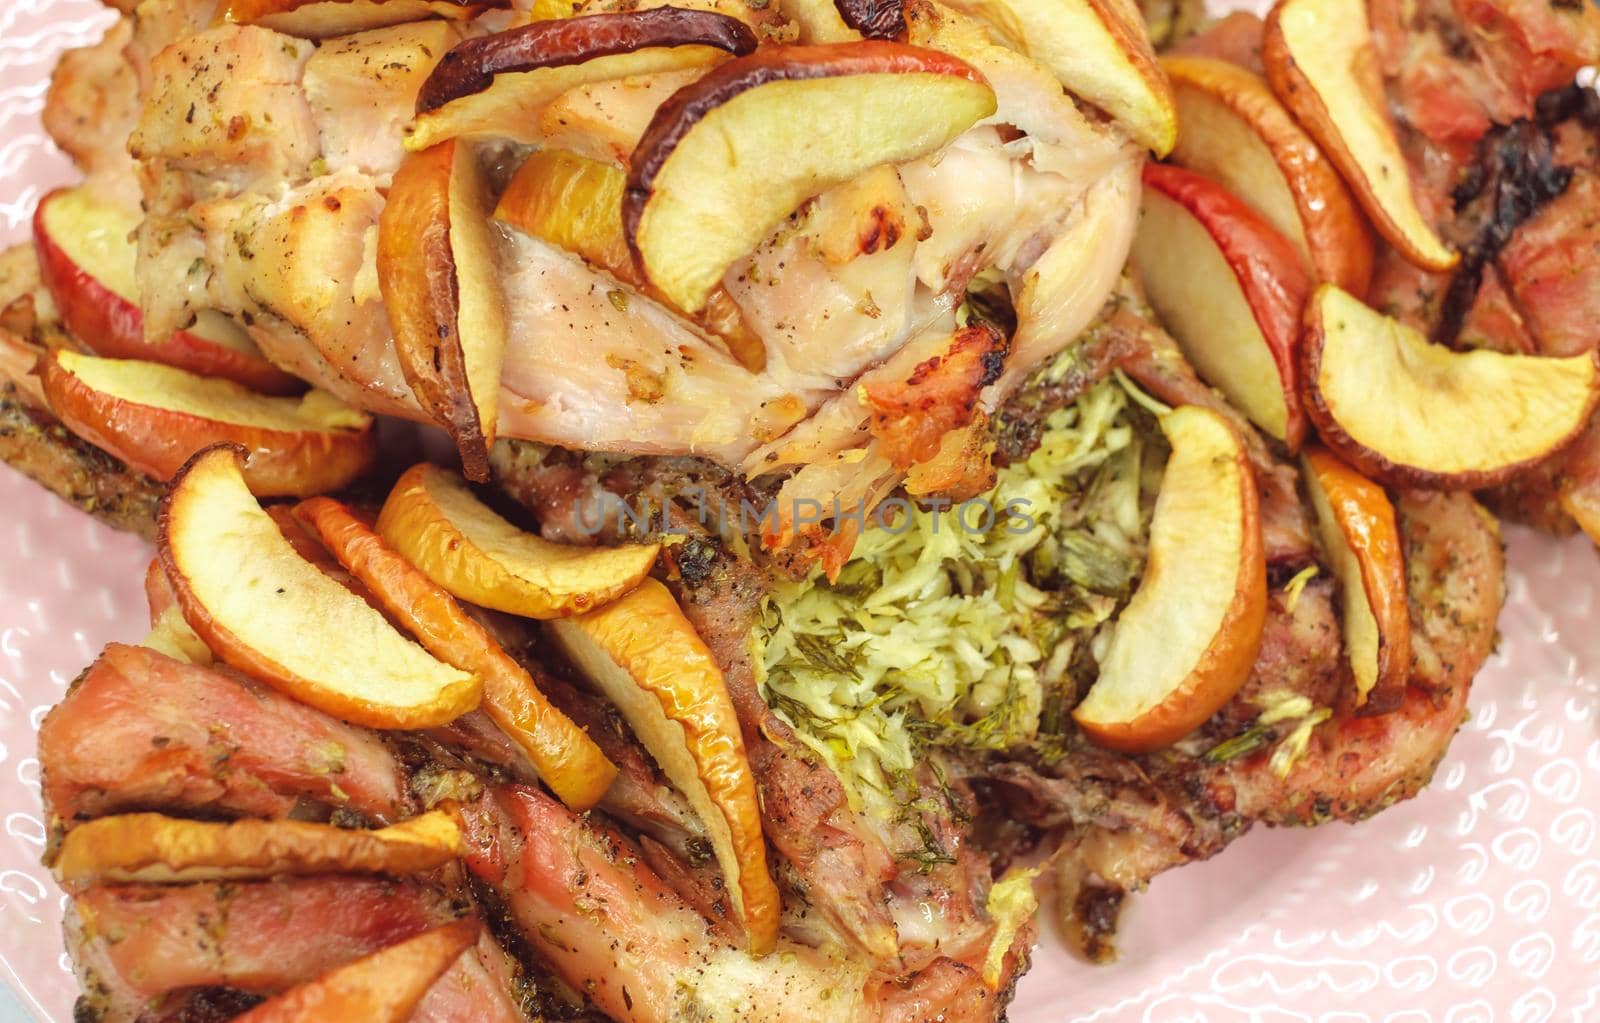 baked chicken with fruits and vegetables